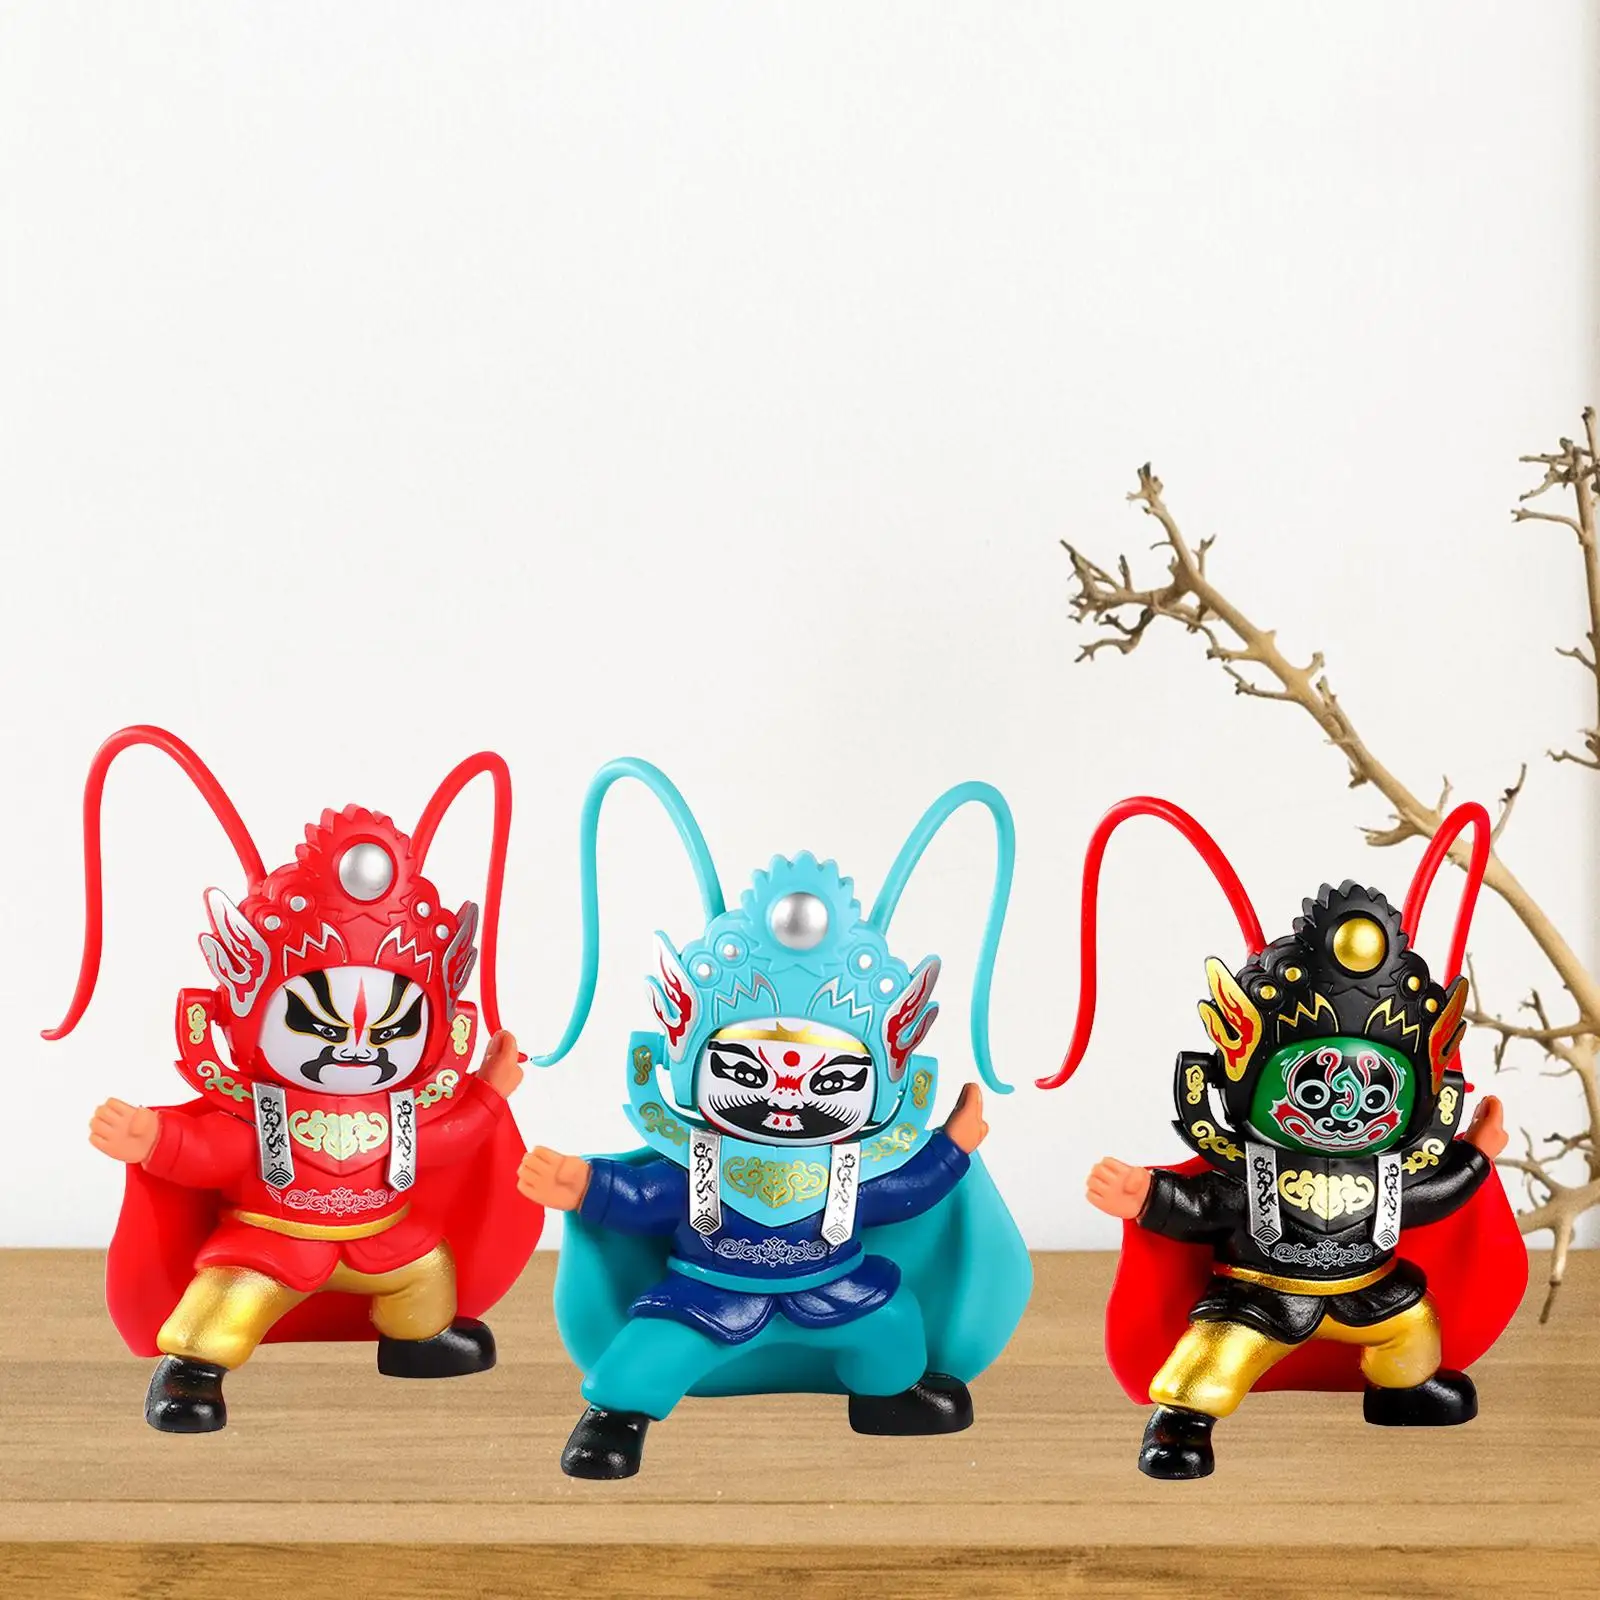 Opera Face Changing Doll Figures, Chinese Folk Art Toy, Portable Toy Chinese Face Changing Figures Traditional Gifts for Kids